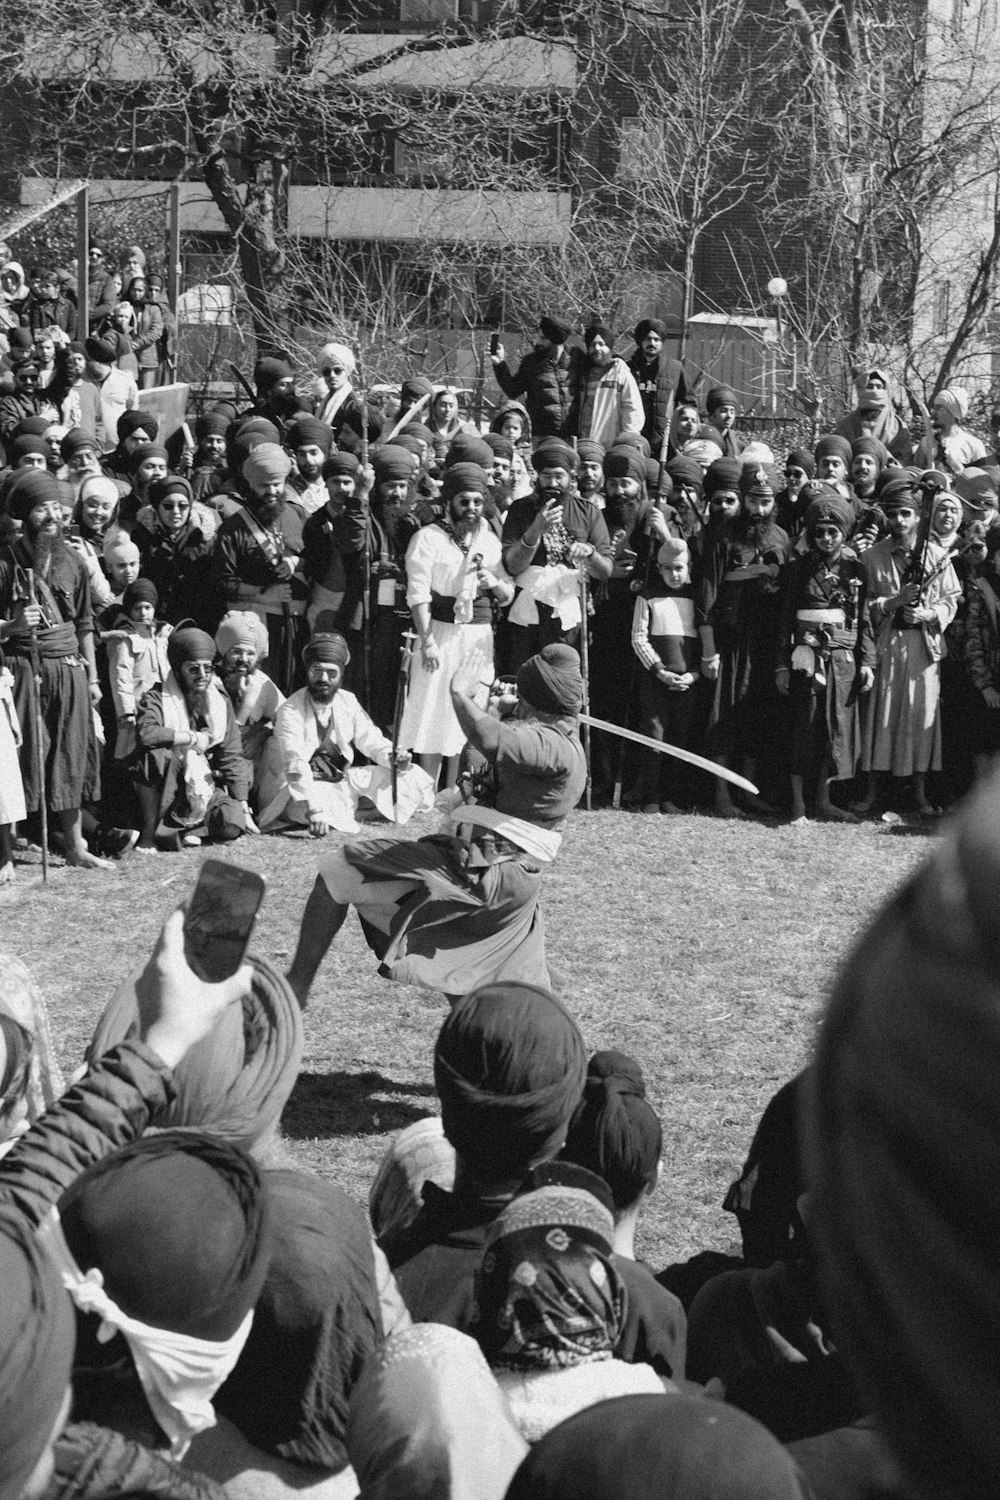 a group of people watching a man with a sword